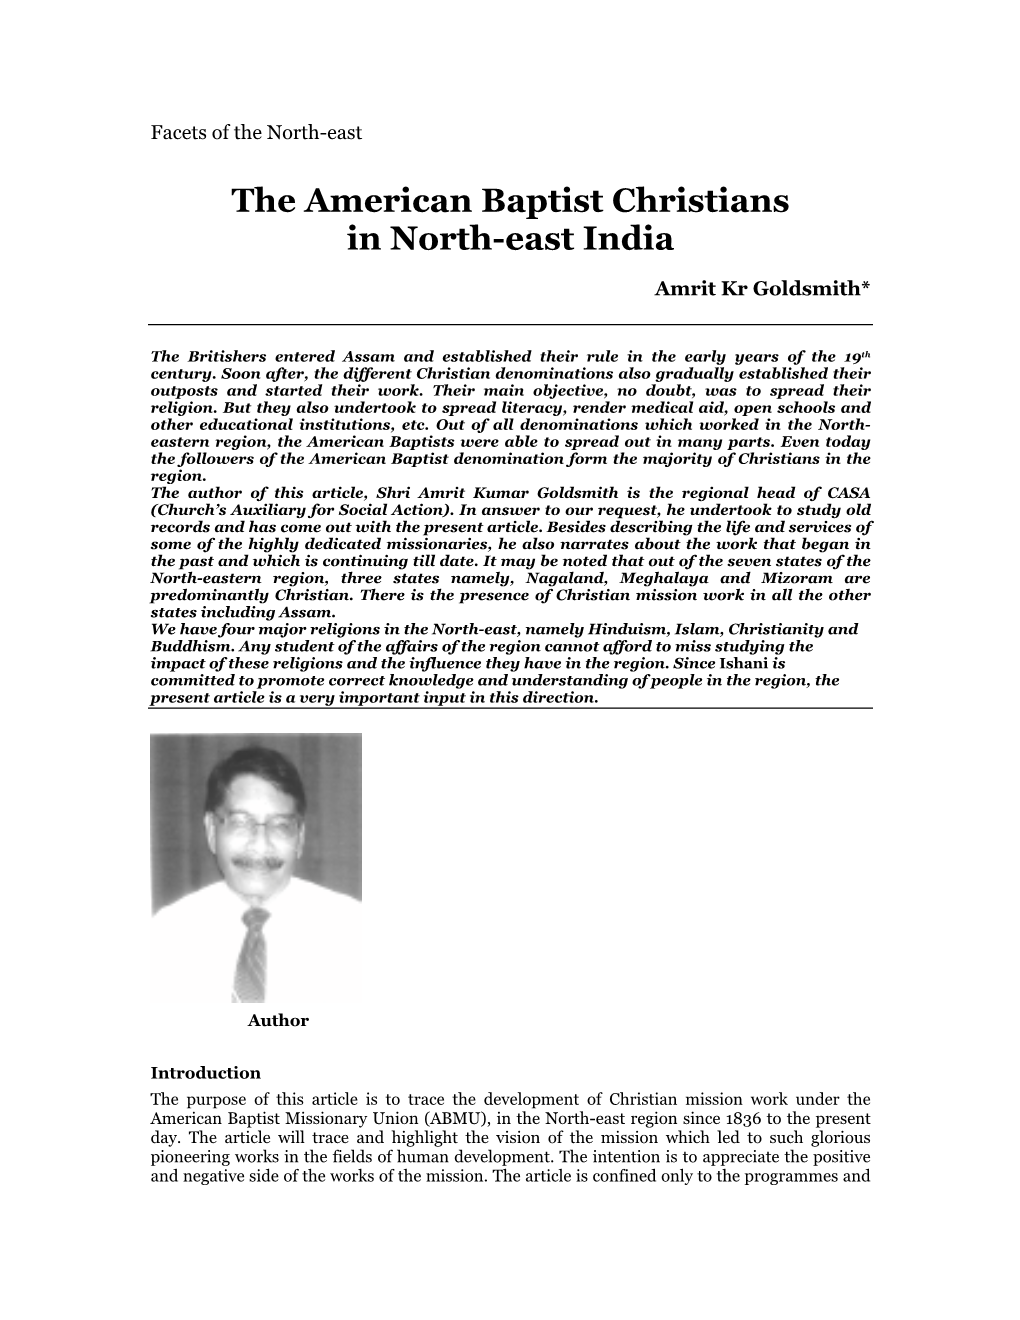 The American Baptist Christians in North-East India